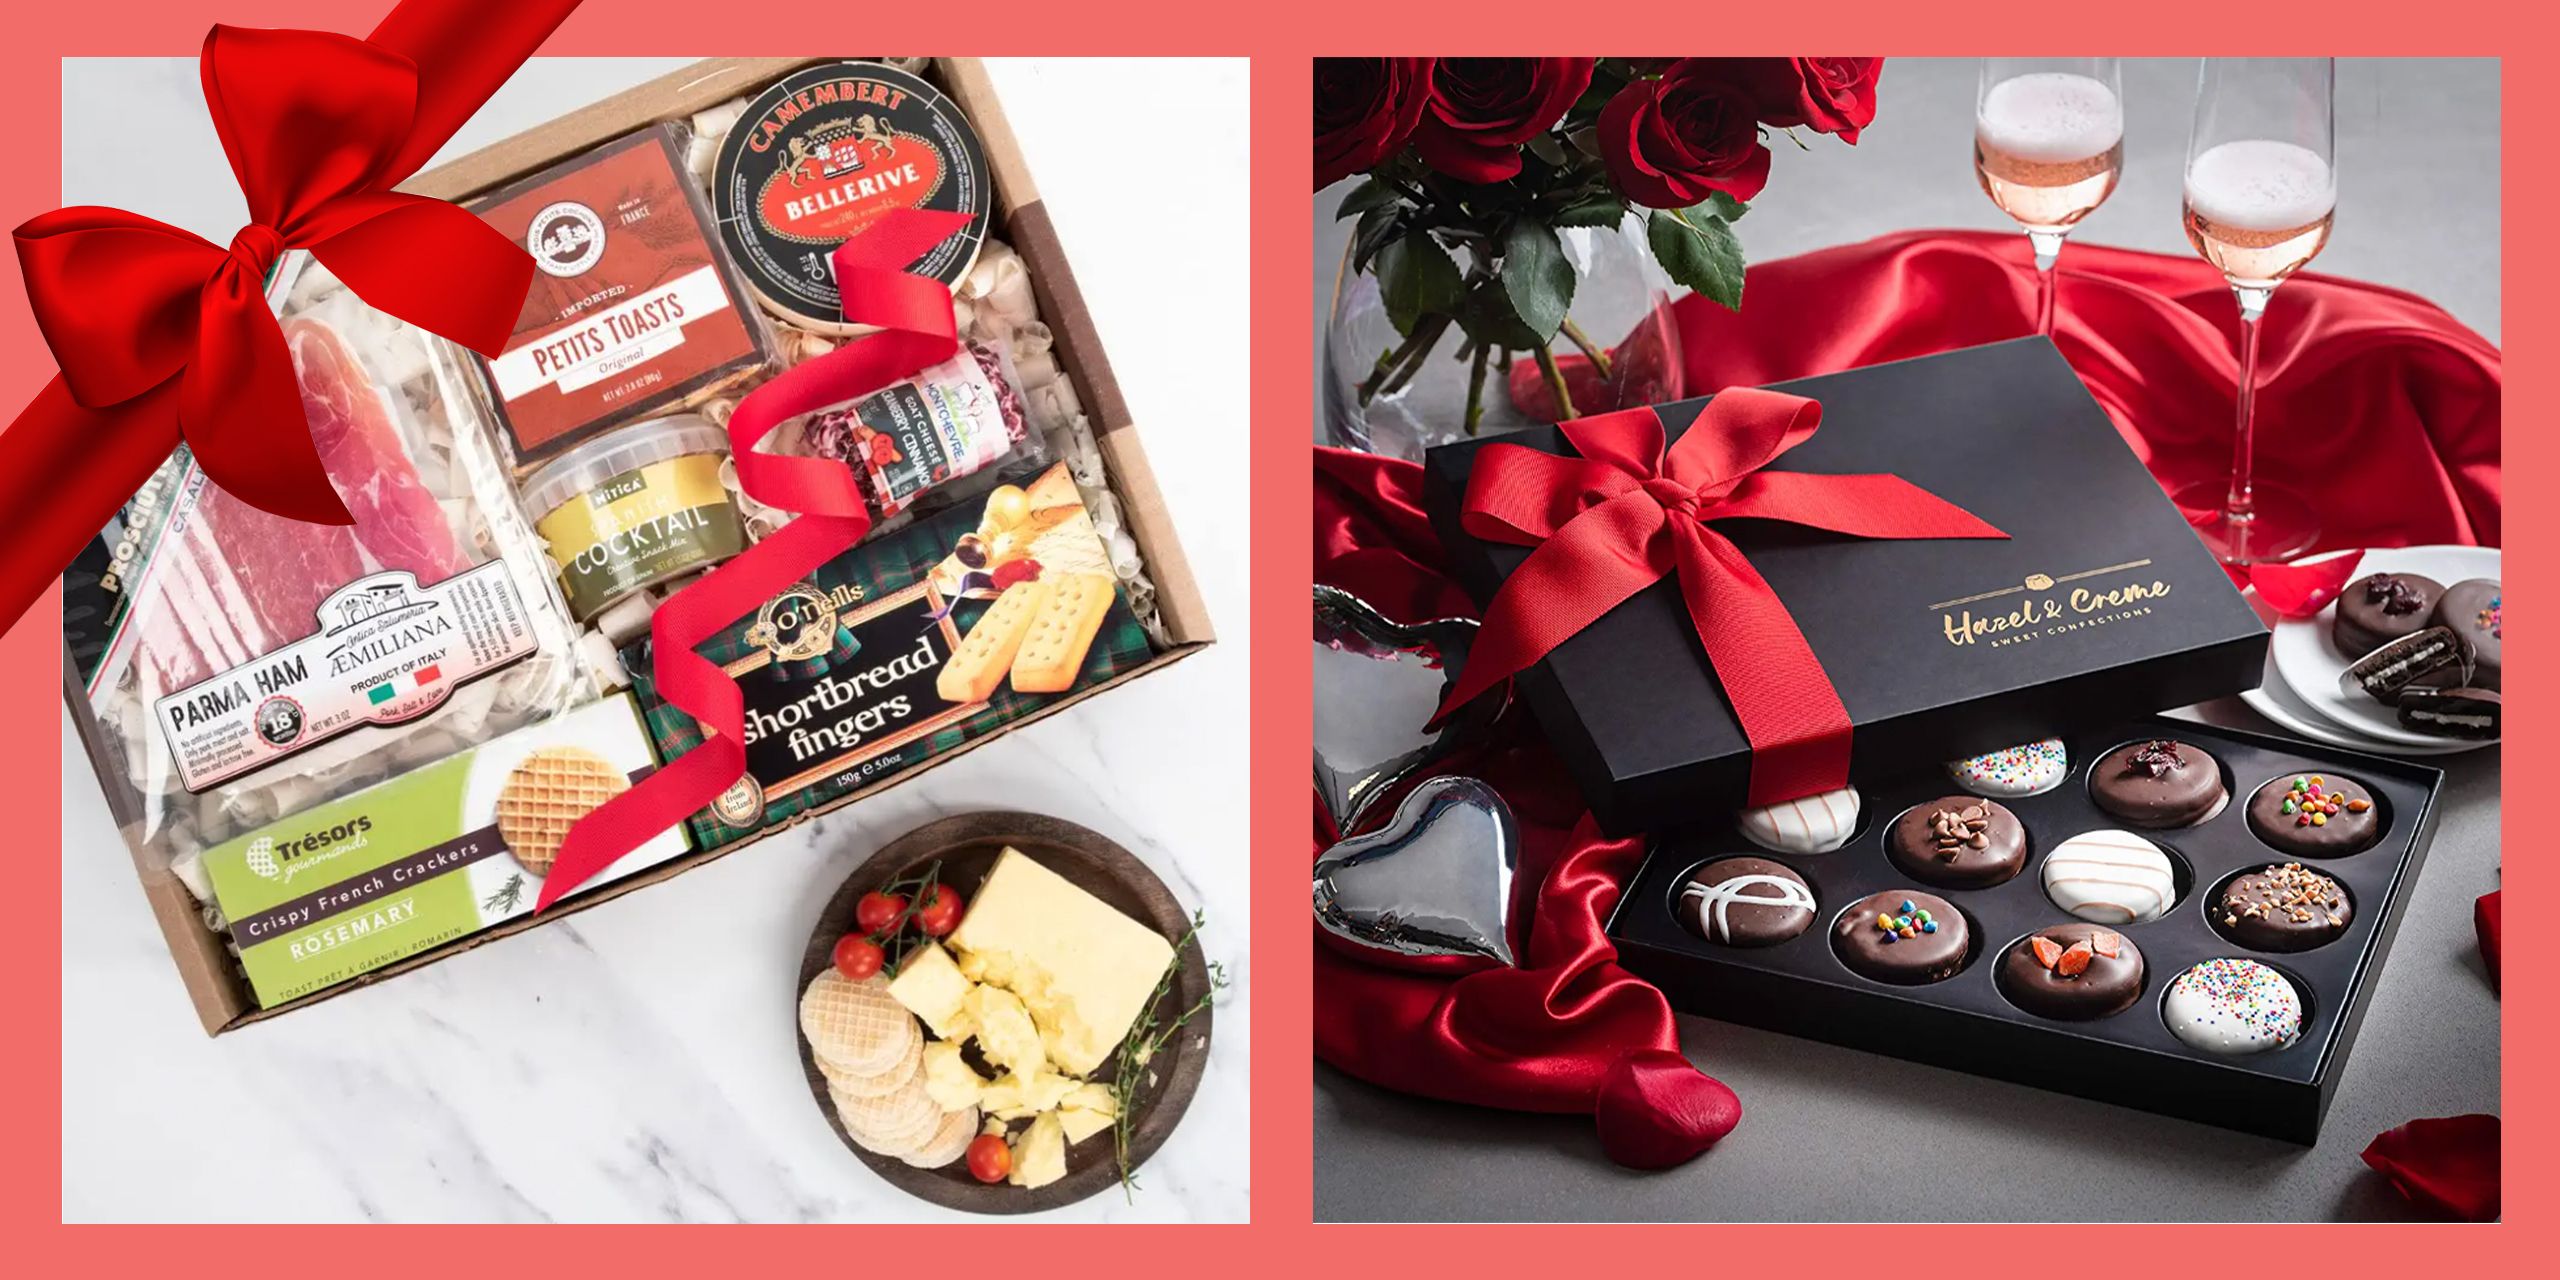 The Best Food Gifts for Women (Holiday Gift Guide)